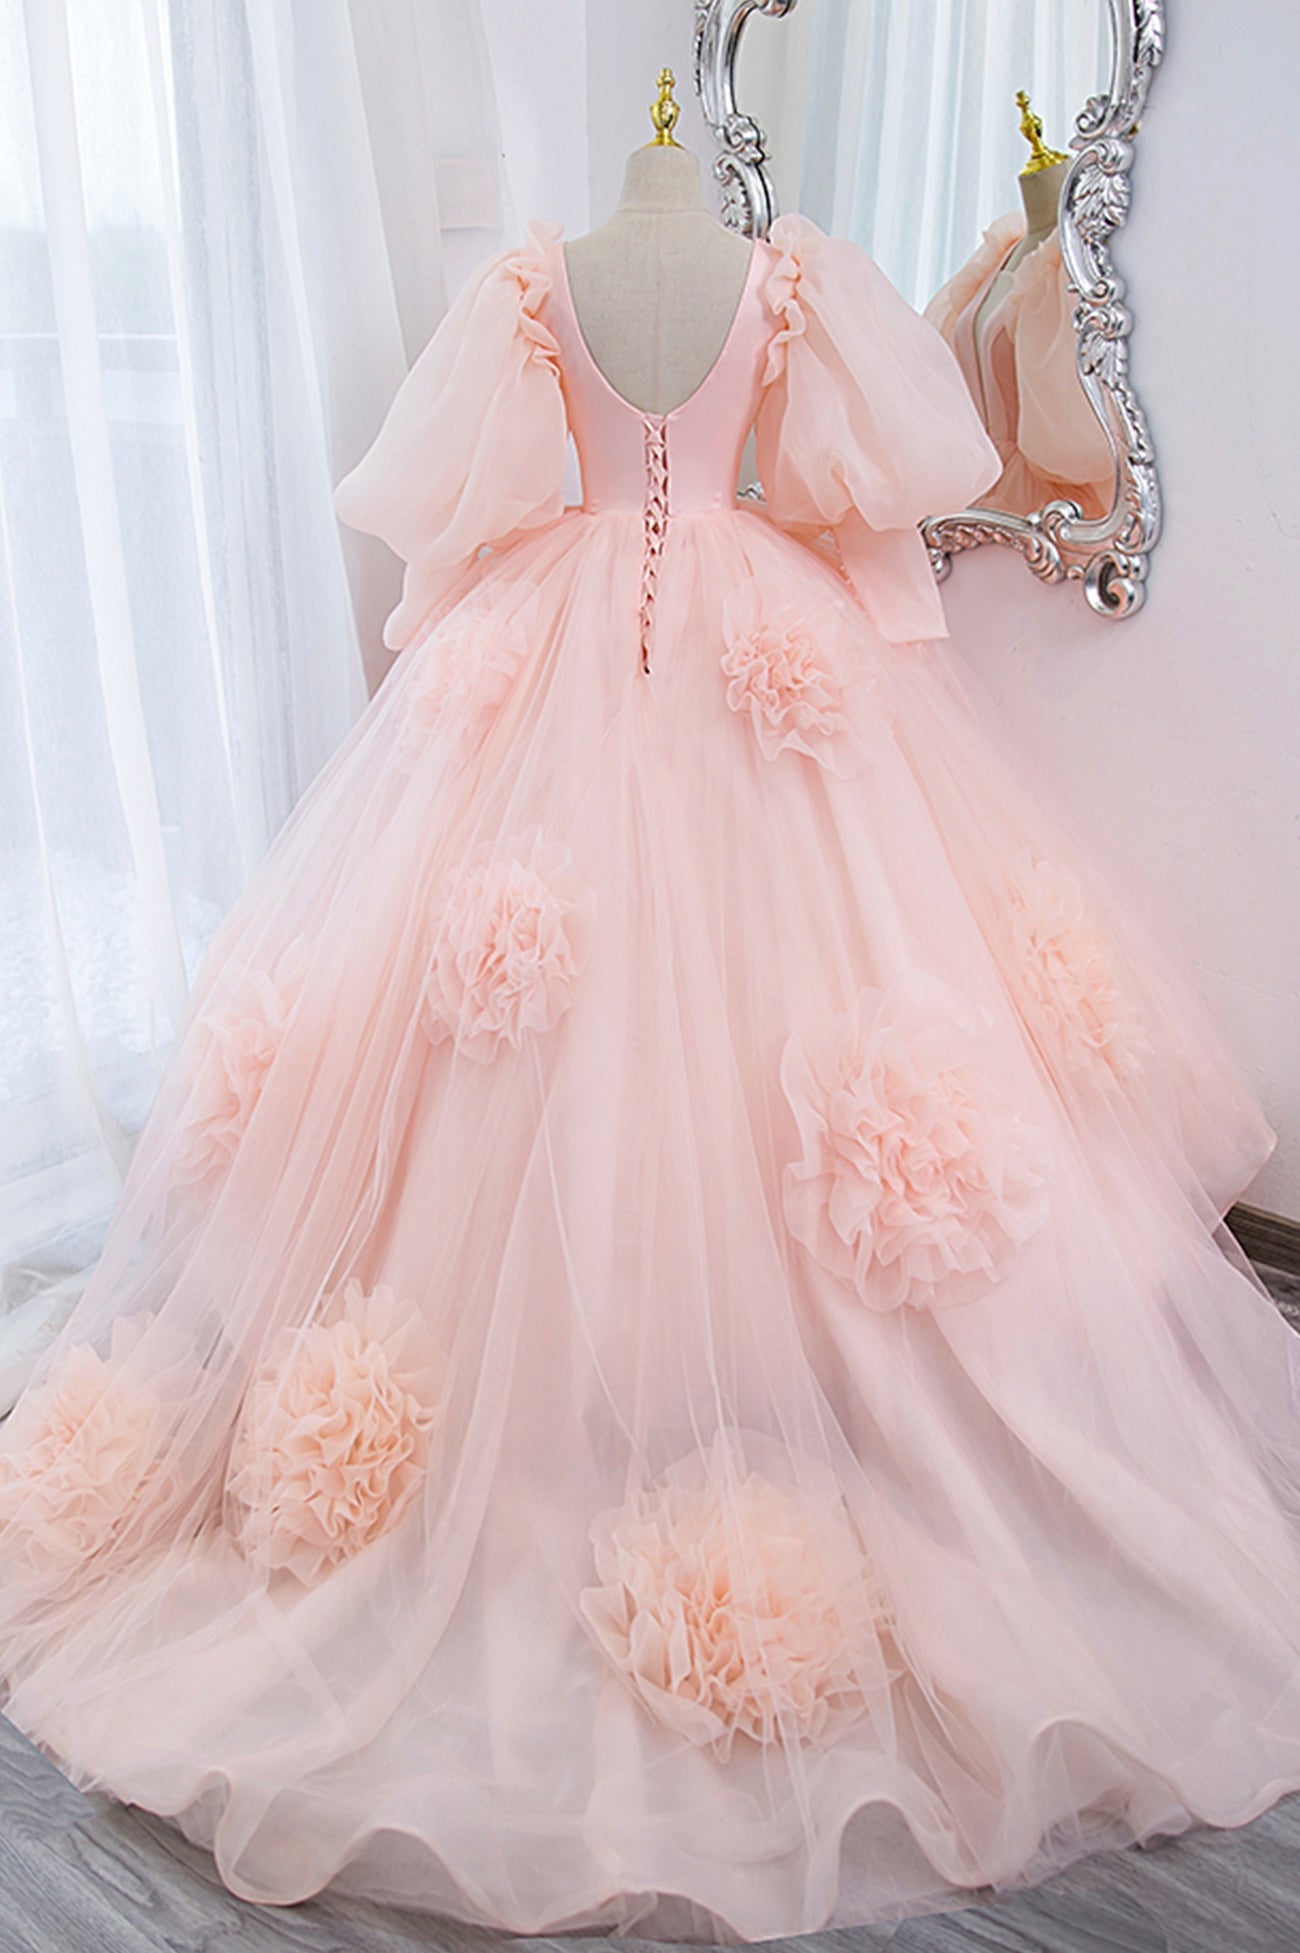 Prom Dresses For Curvy Figure, Pink V-Neck Tulle Long Prom Dress, A-Line Puff Sleeve Princess Dress